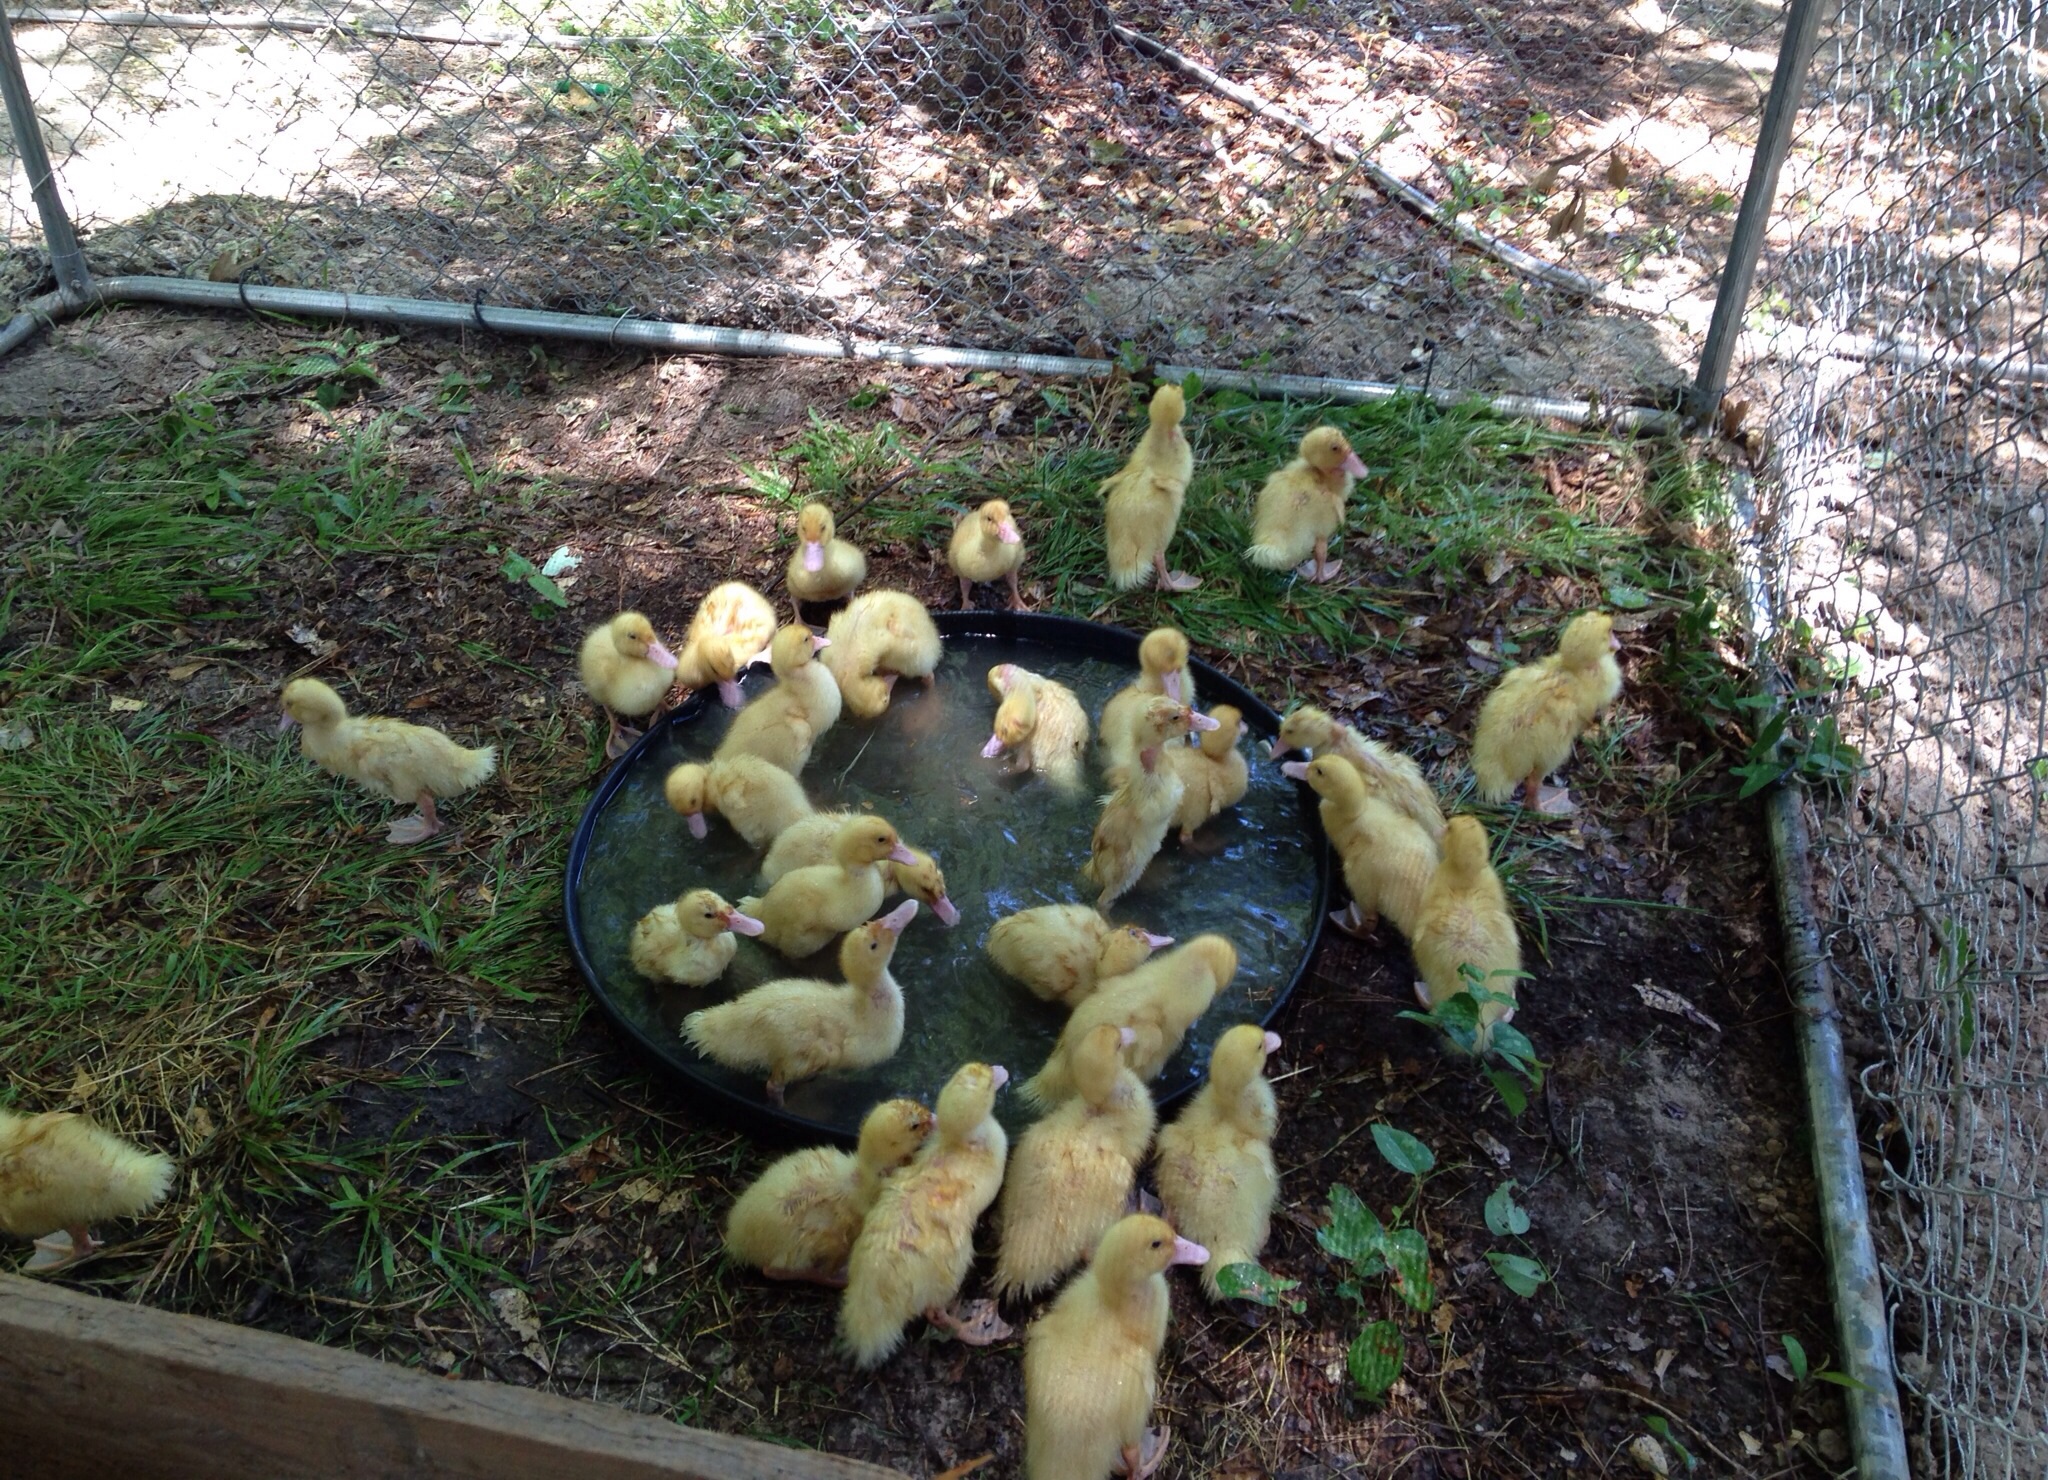 A 2" rubber hot water heater overflow pan makes a perfect swimming pool for month old ducklings!